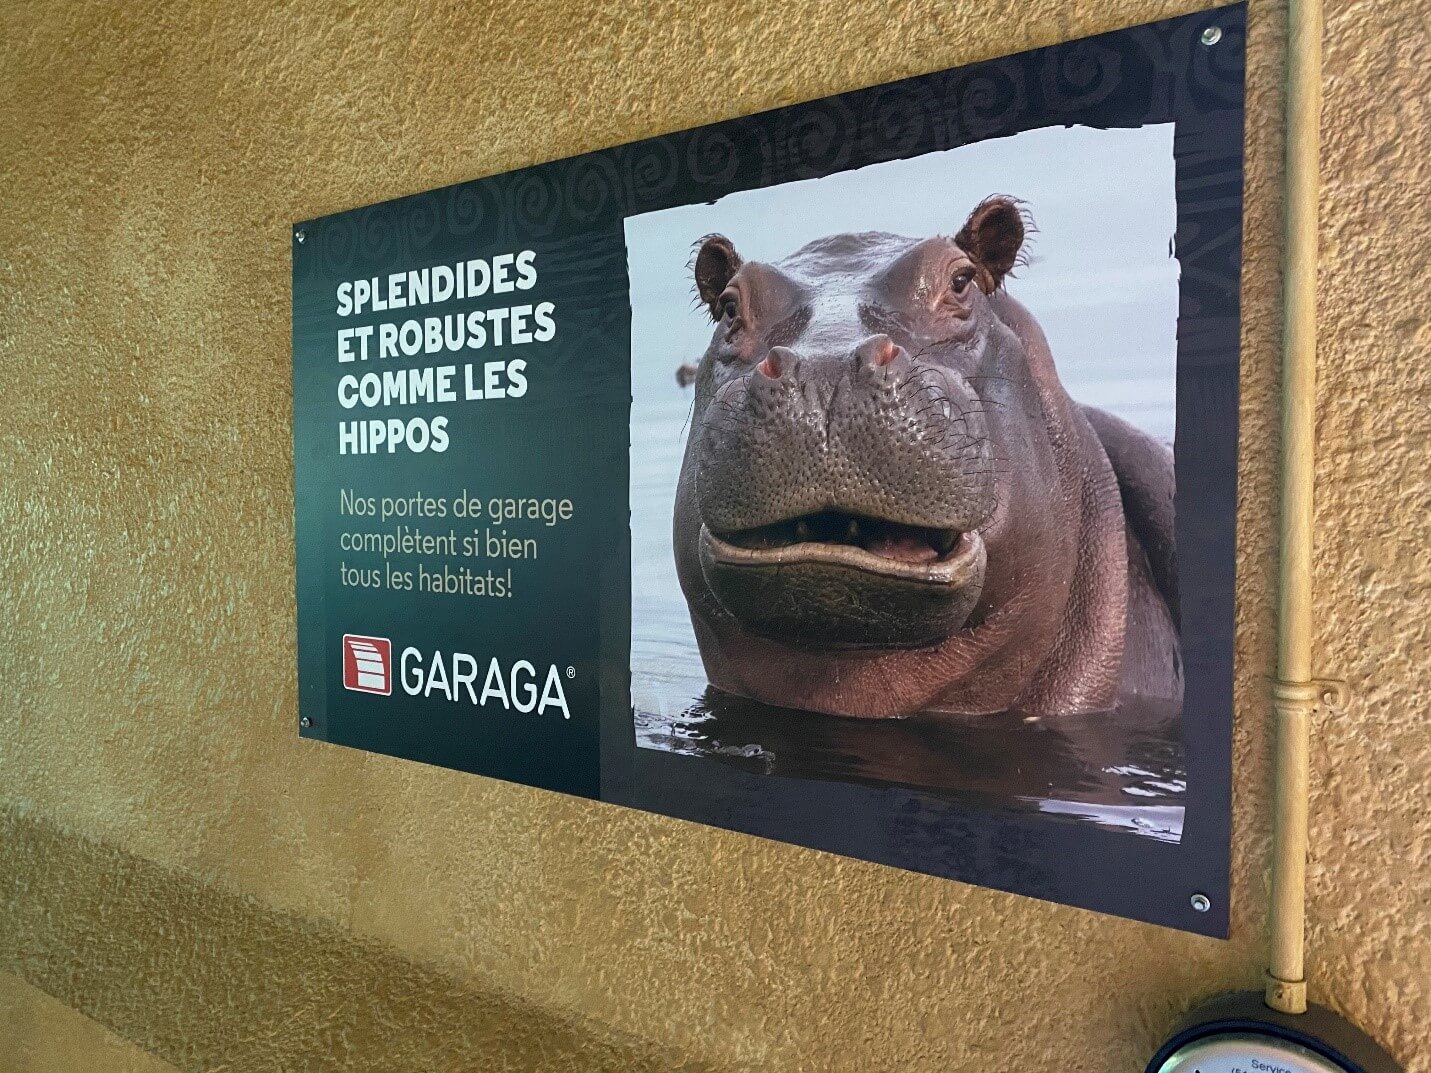 Garaga is proud to contribute to the well‑being of the Granby Zoo's hippos with its panoramic garage doors